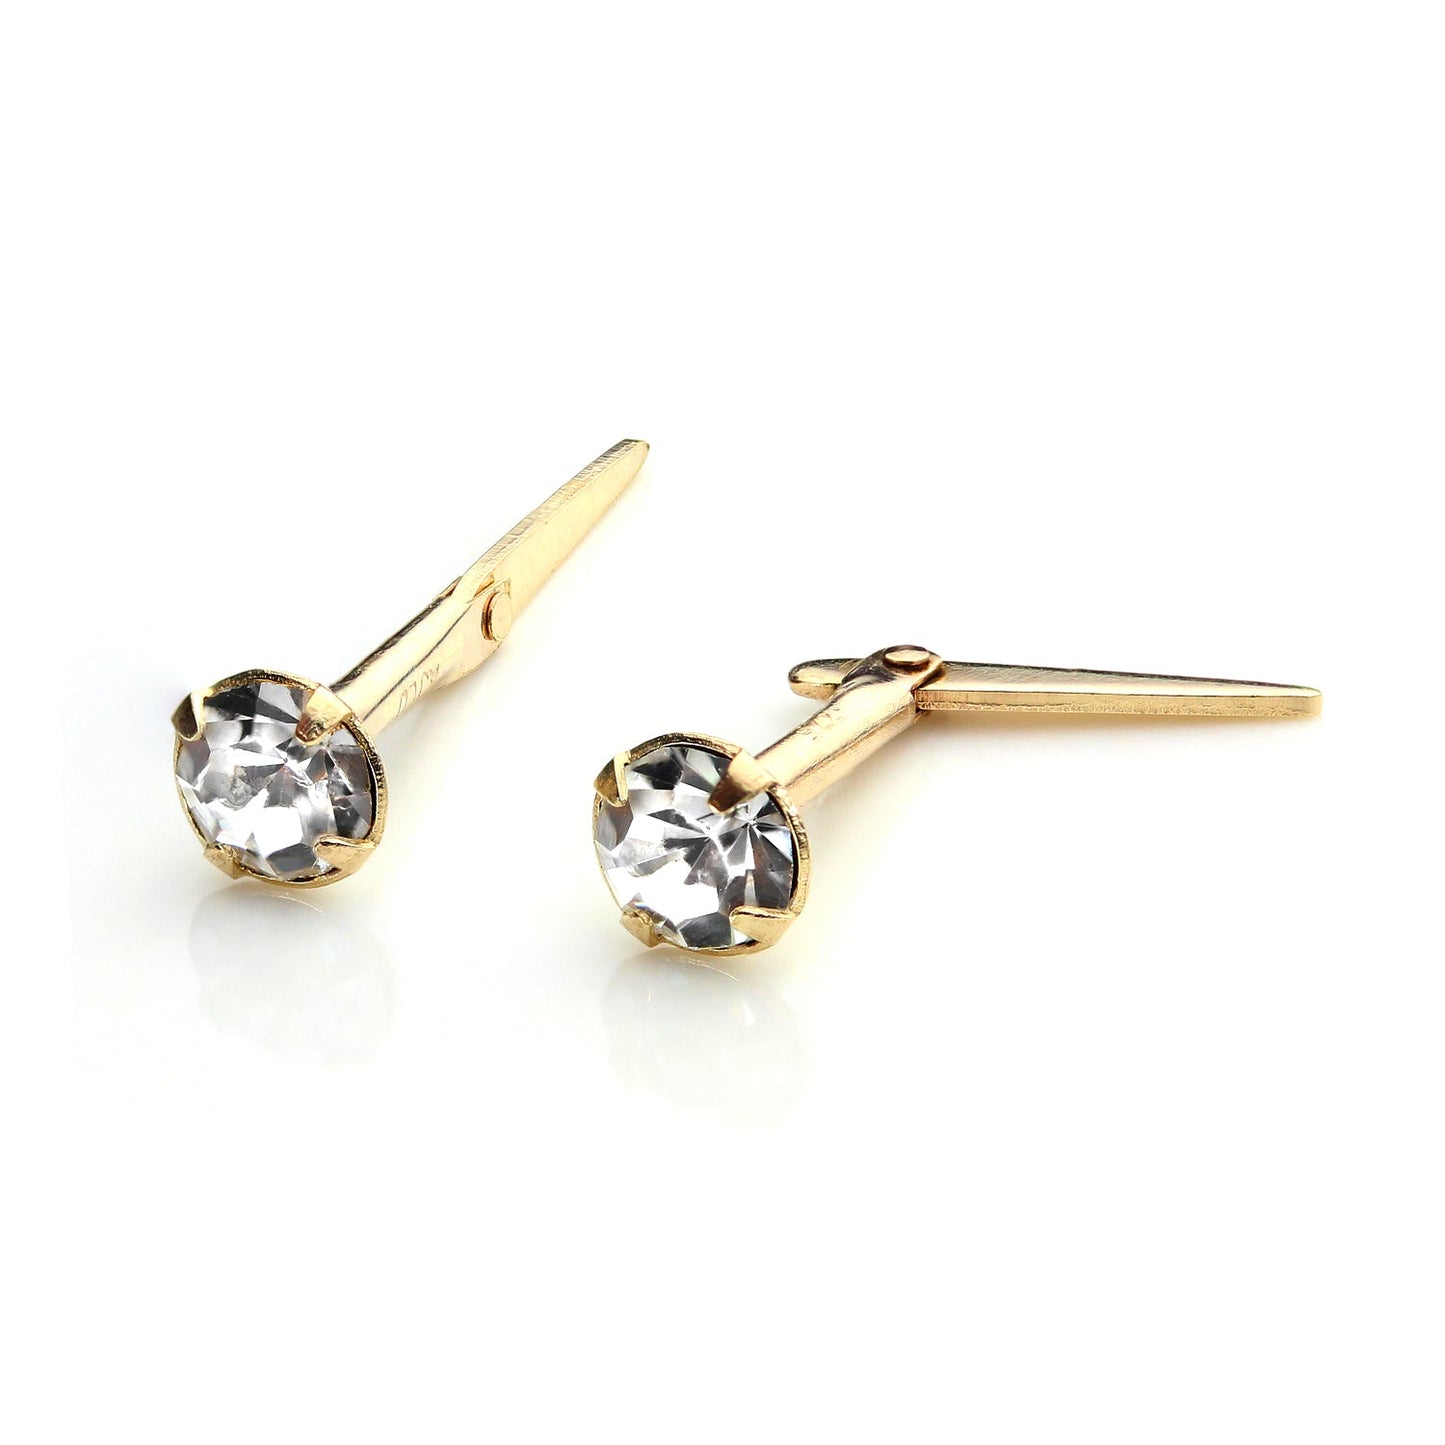 9ct Gold Andralok Stud Earrings with 3mm Crystal